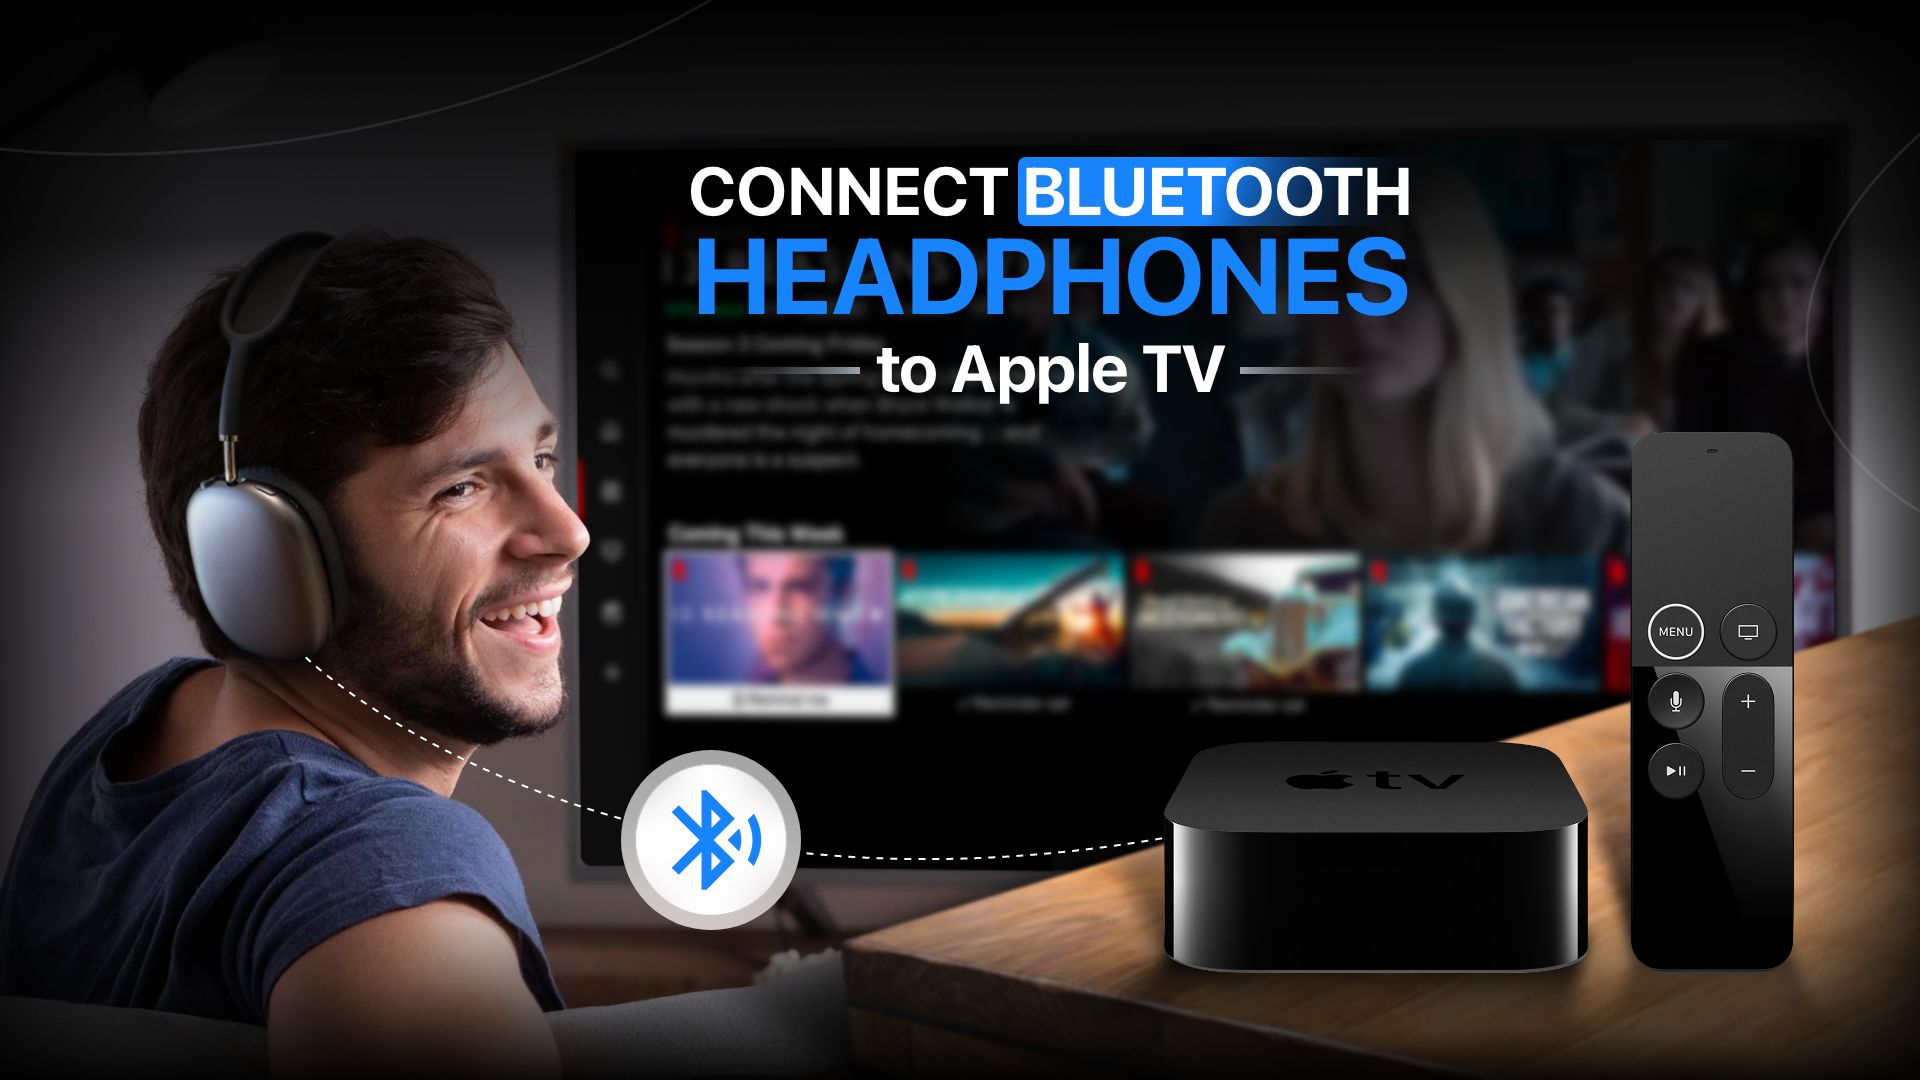 How To Connect Bluetooth Headphones to Apple TV